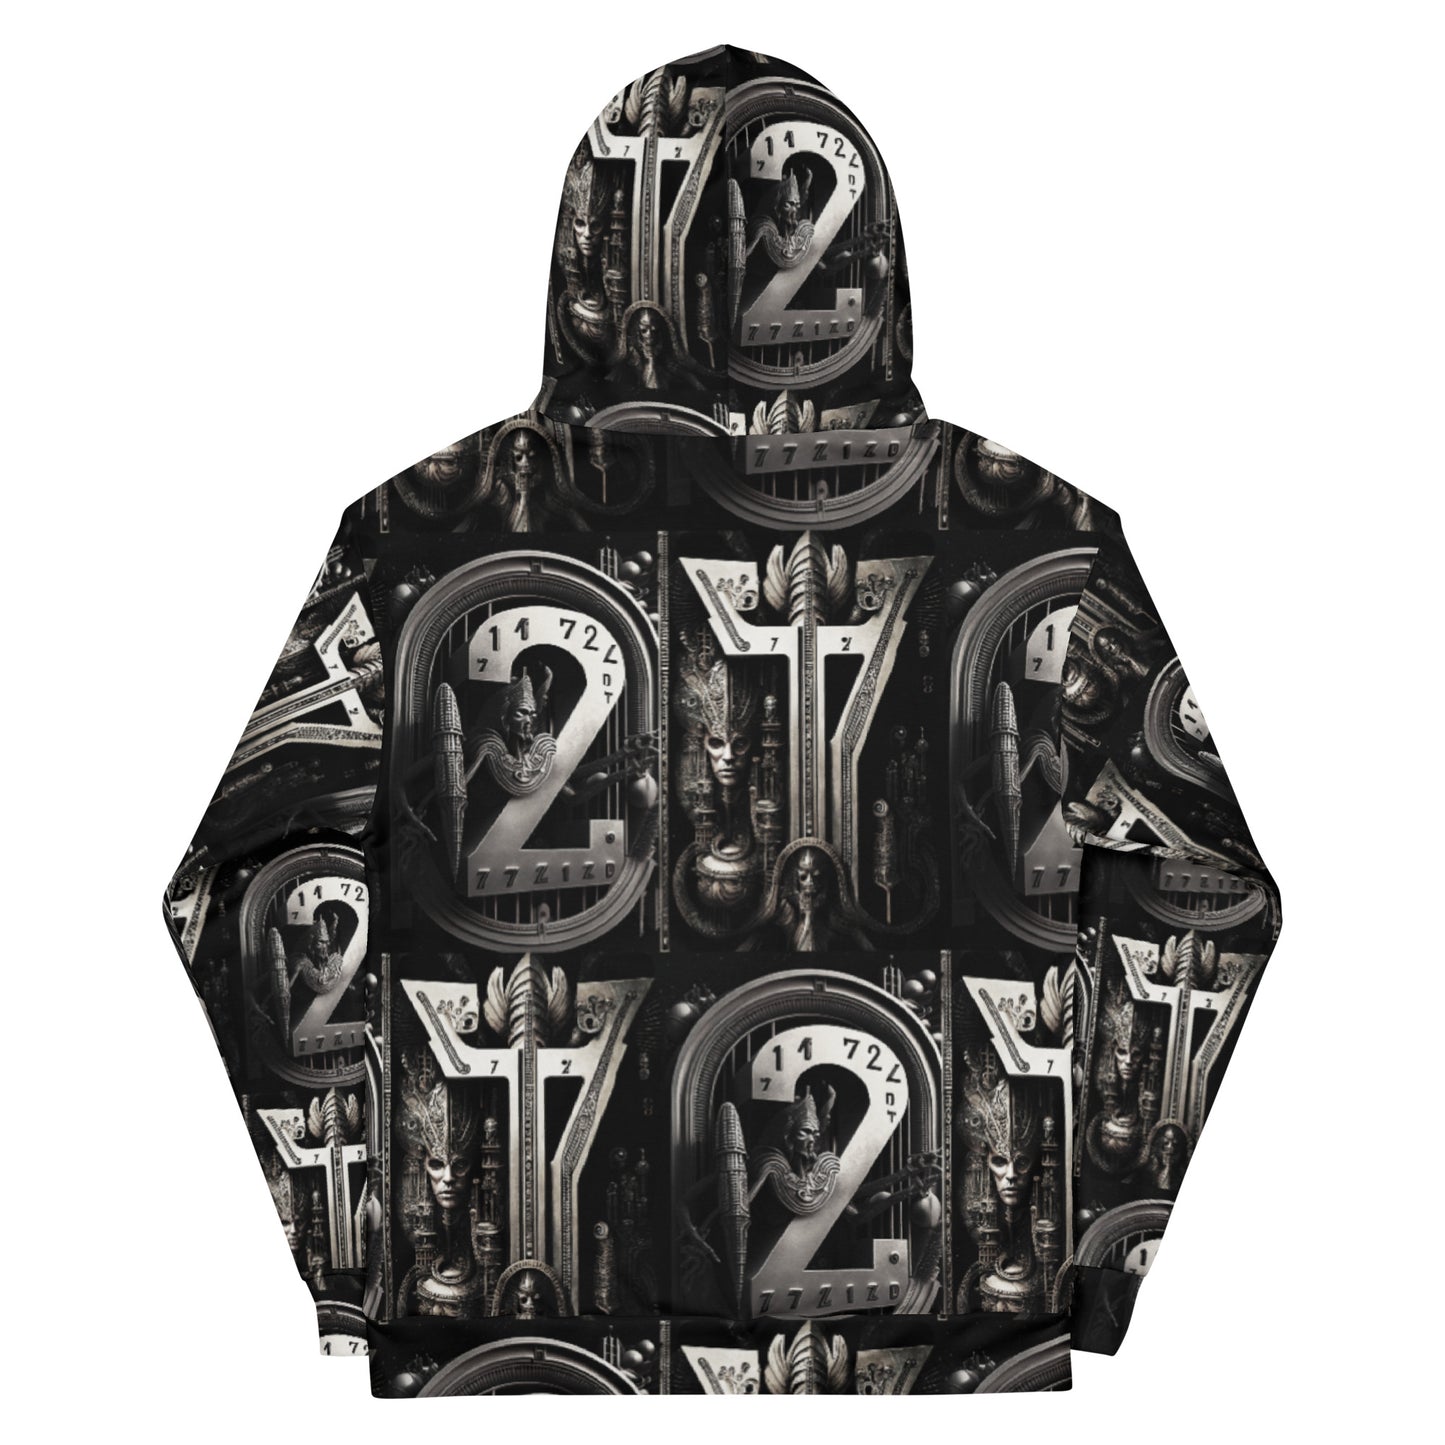 27_03 Conspiracy Unisex Hoodie - 27 27 27 27 27 and not 28